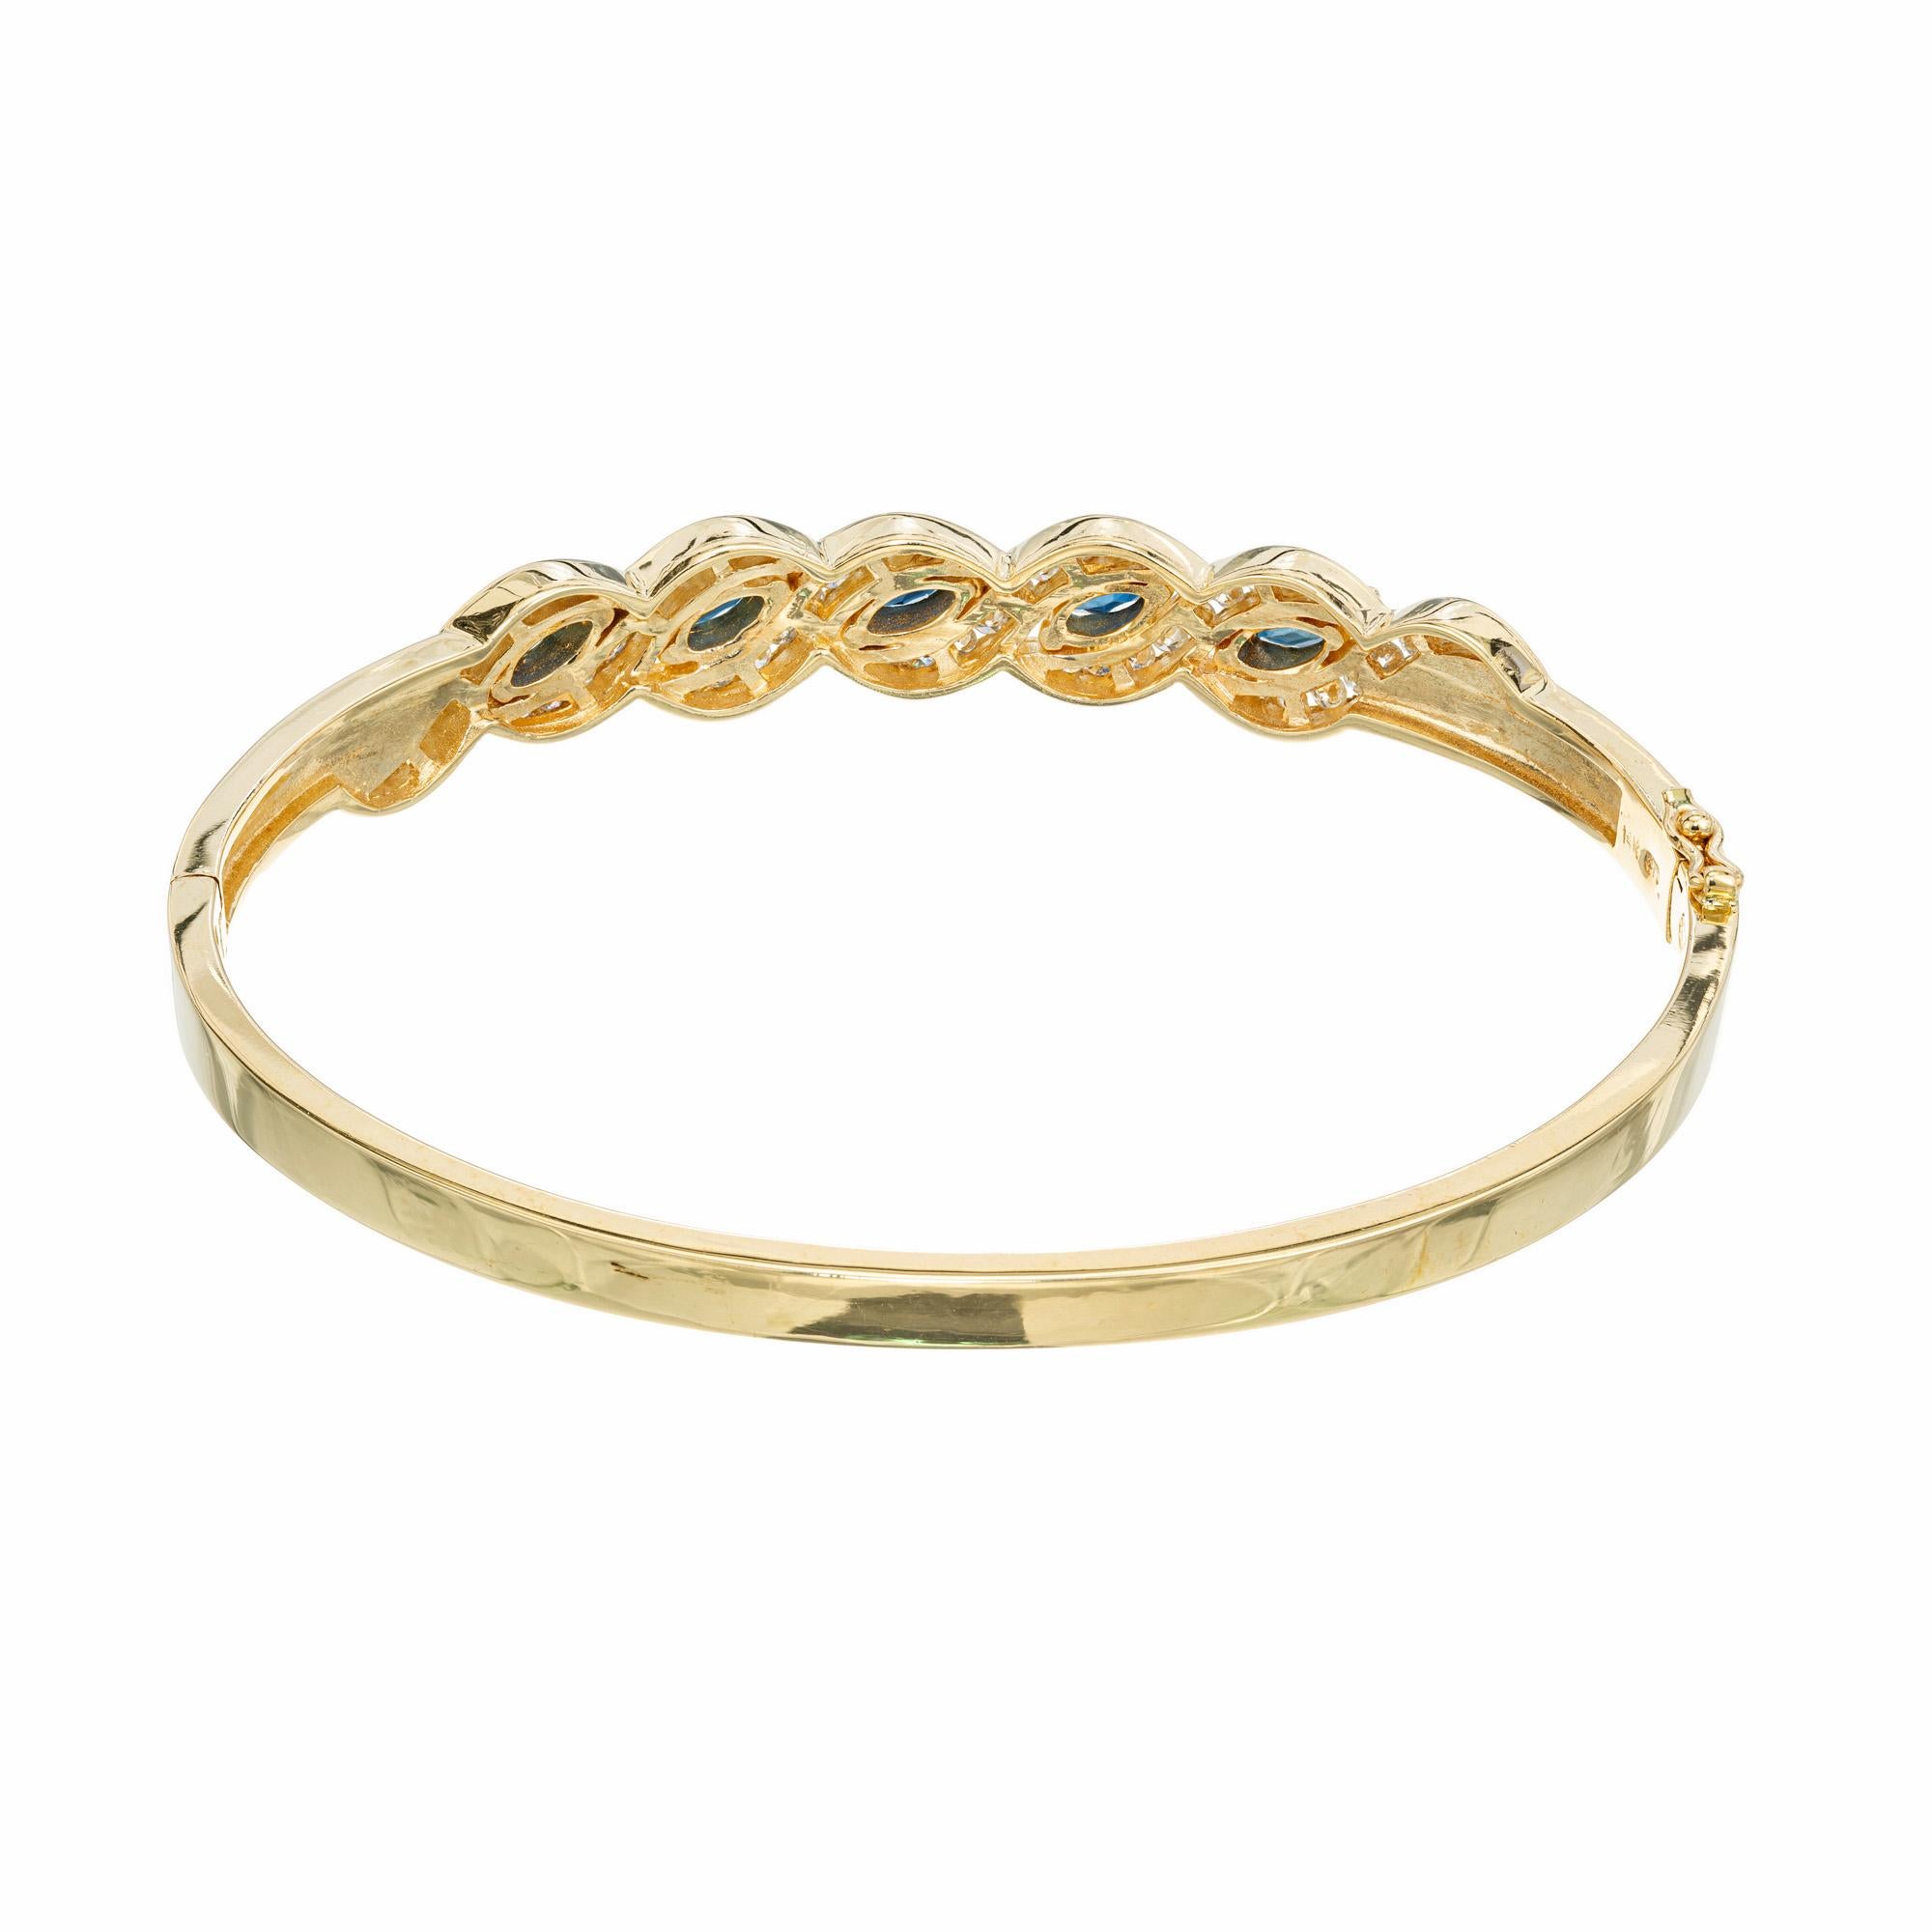 1.75 Carat Marquise Sapphire Round Diamond Swirl Yellow Gold Bangle Bracelet In Good Condition For Sale In Stamford, CT